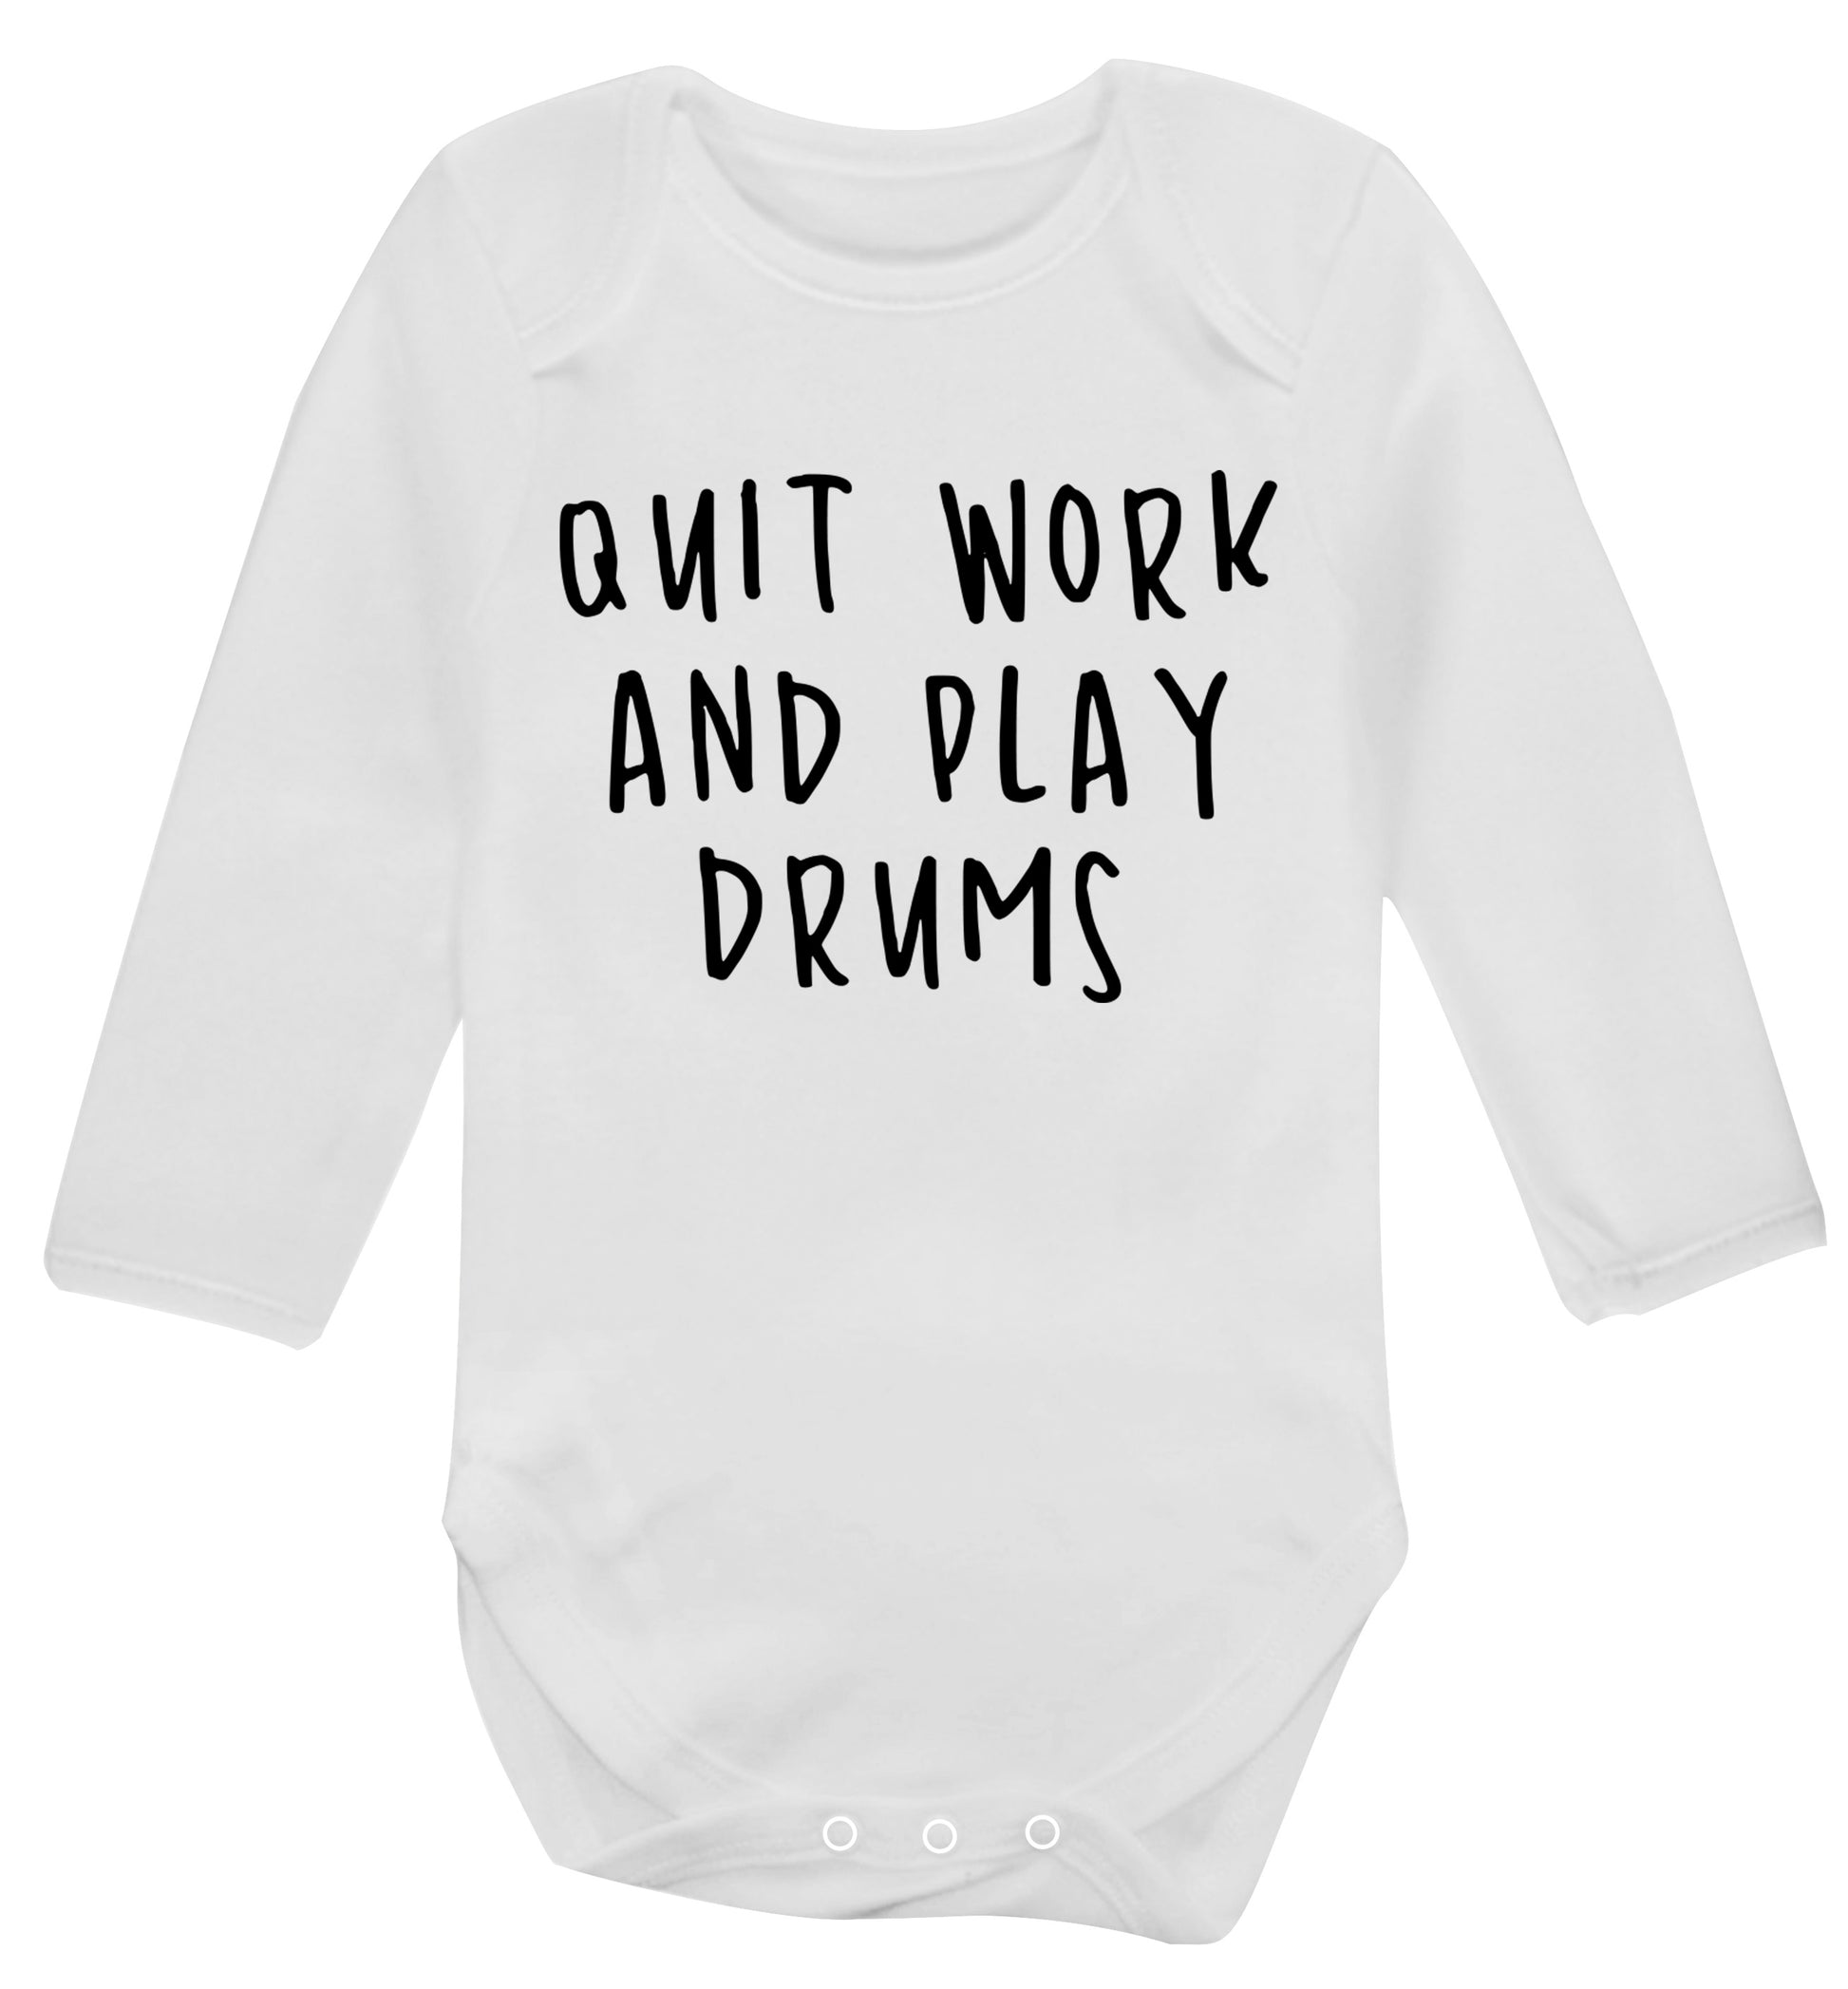 Quit work and play drums Baby Vest long sleeved white 6-12 months